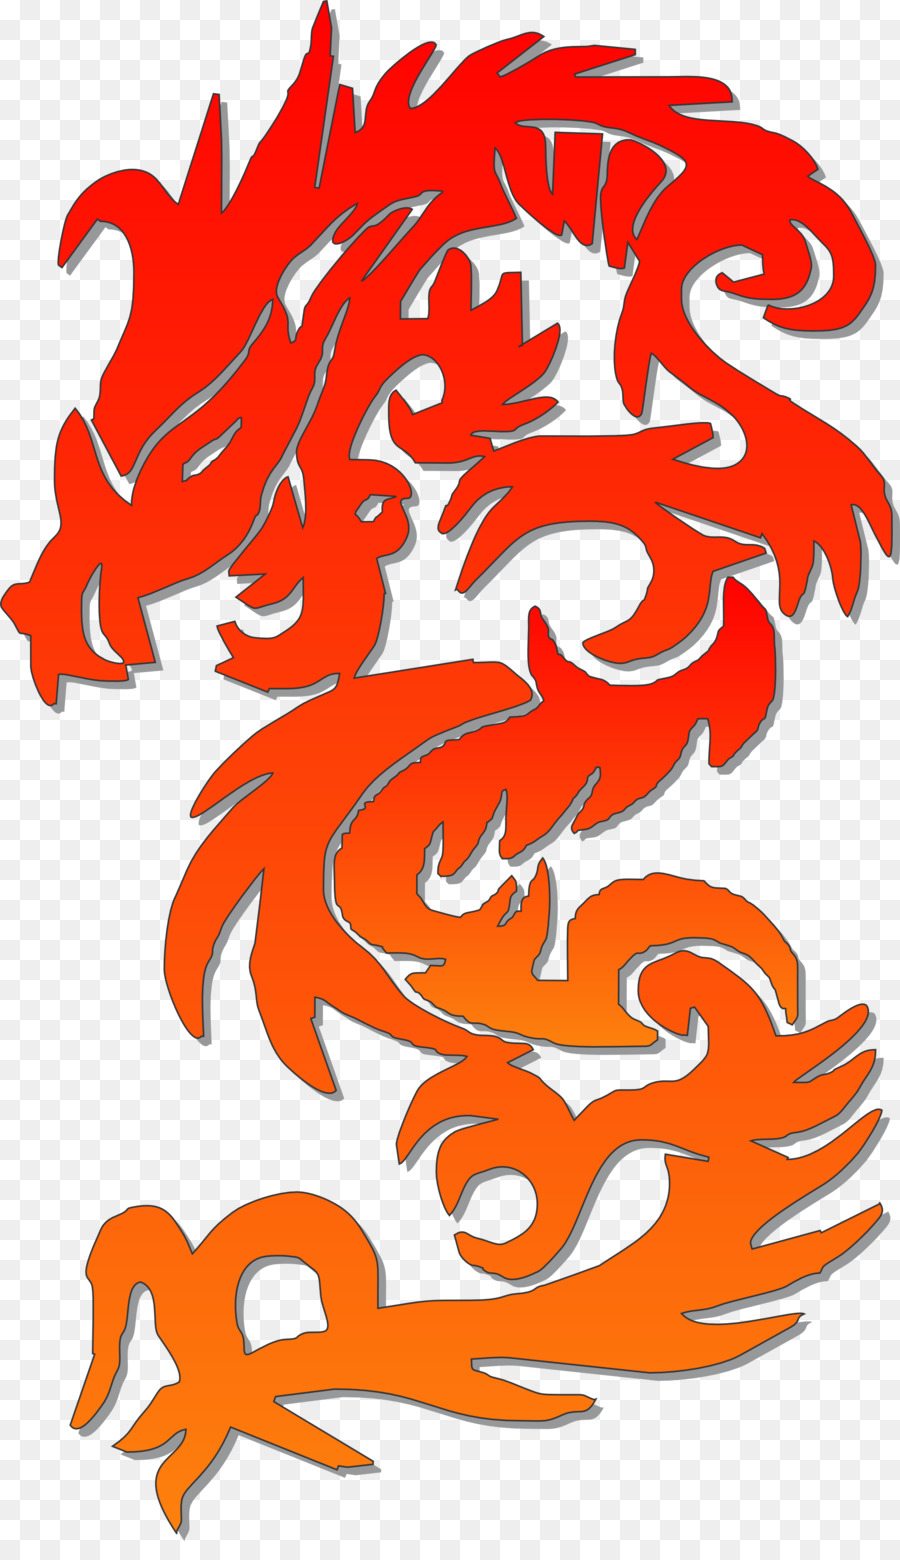 Chinese dragon Clip art - Chinese Dragons Images png download - 1979*3391 - Free Transparent Chinese Dragon png Download.